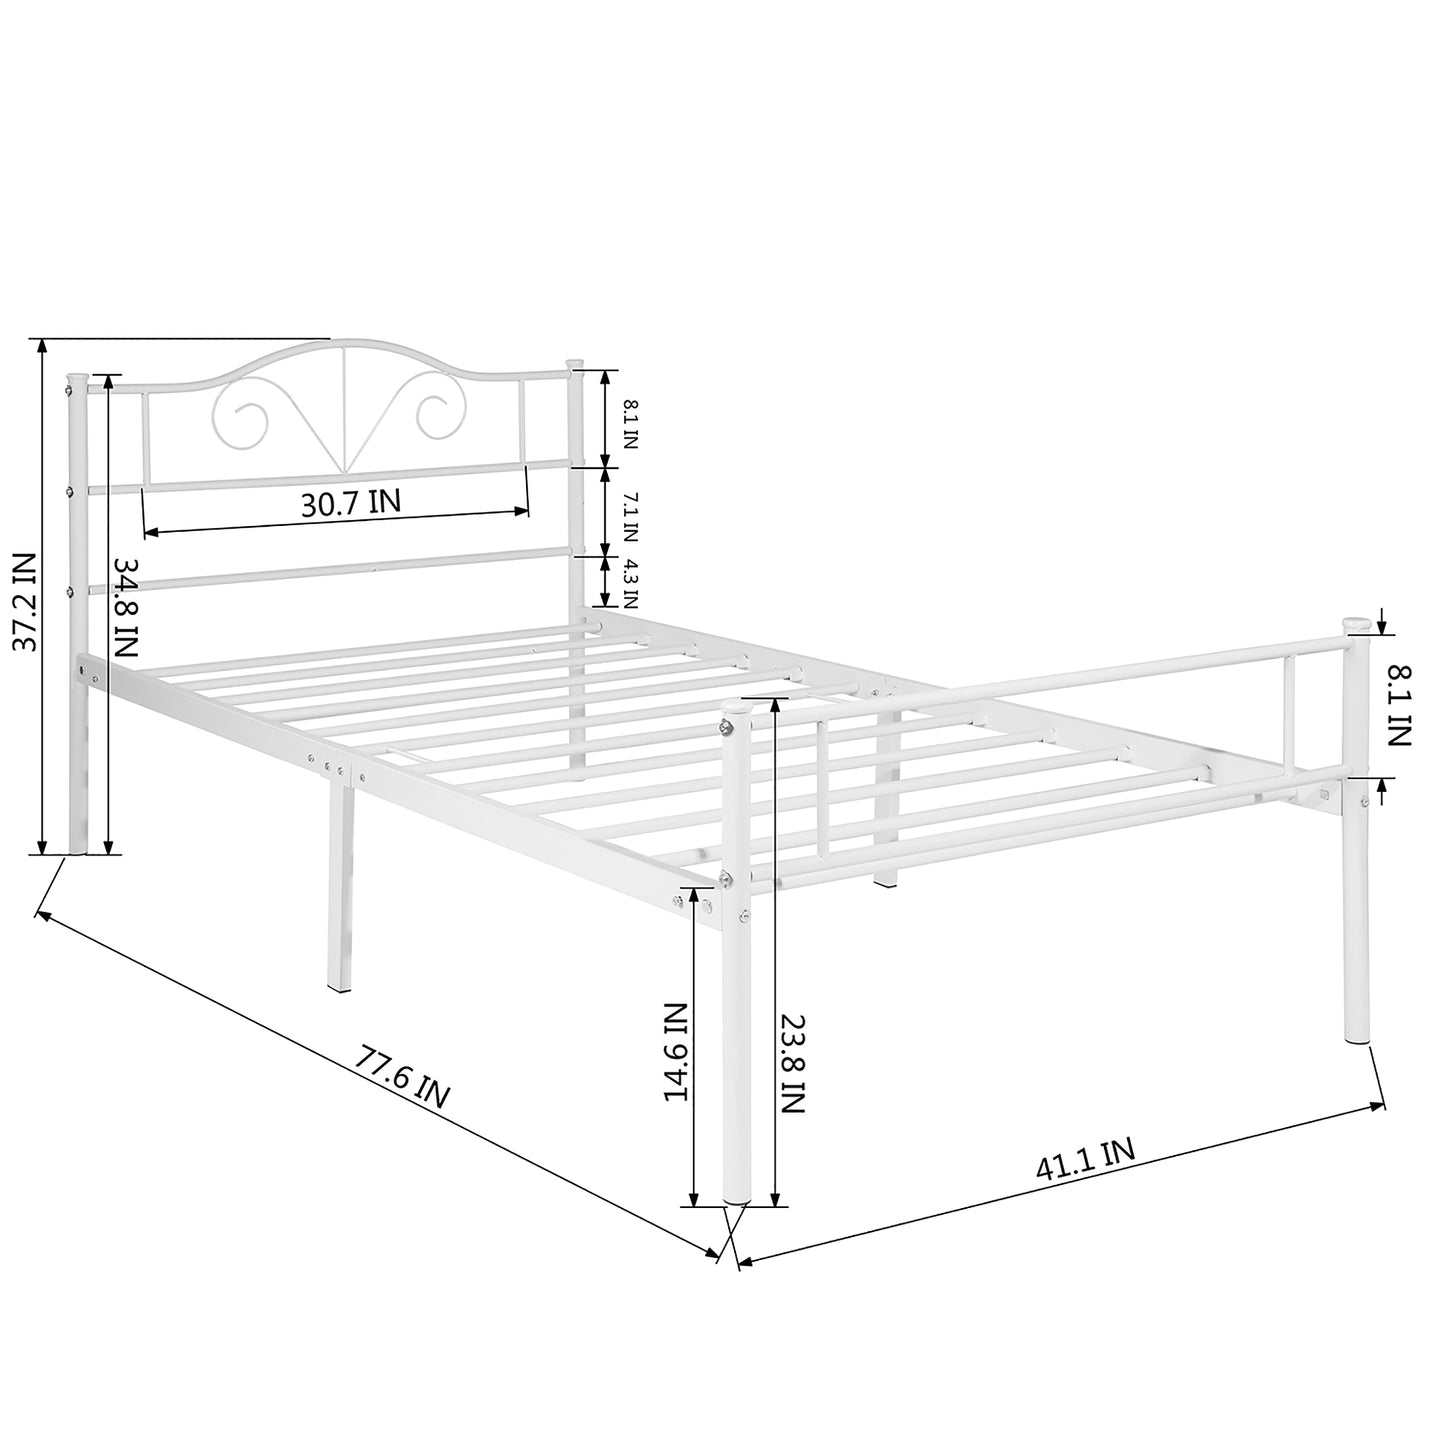 LT twin size single bed frame in white color for adult and children used in bedroom or dormitory with large storage space under the bed